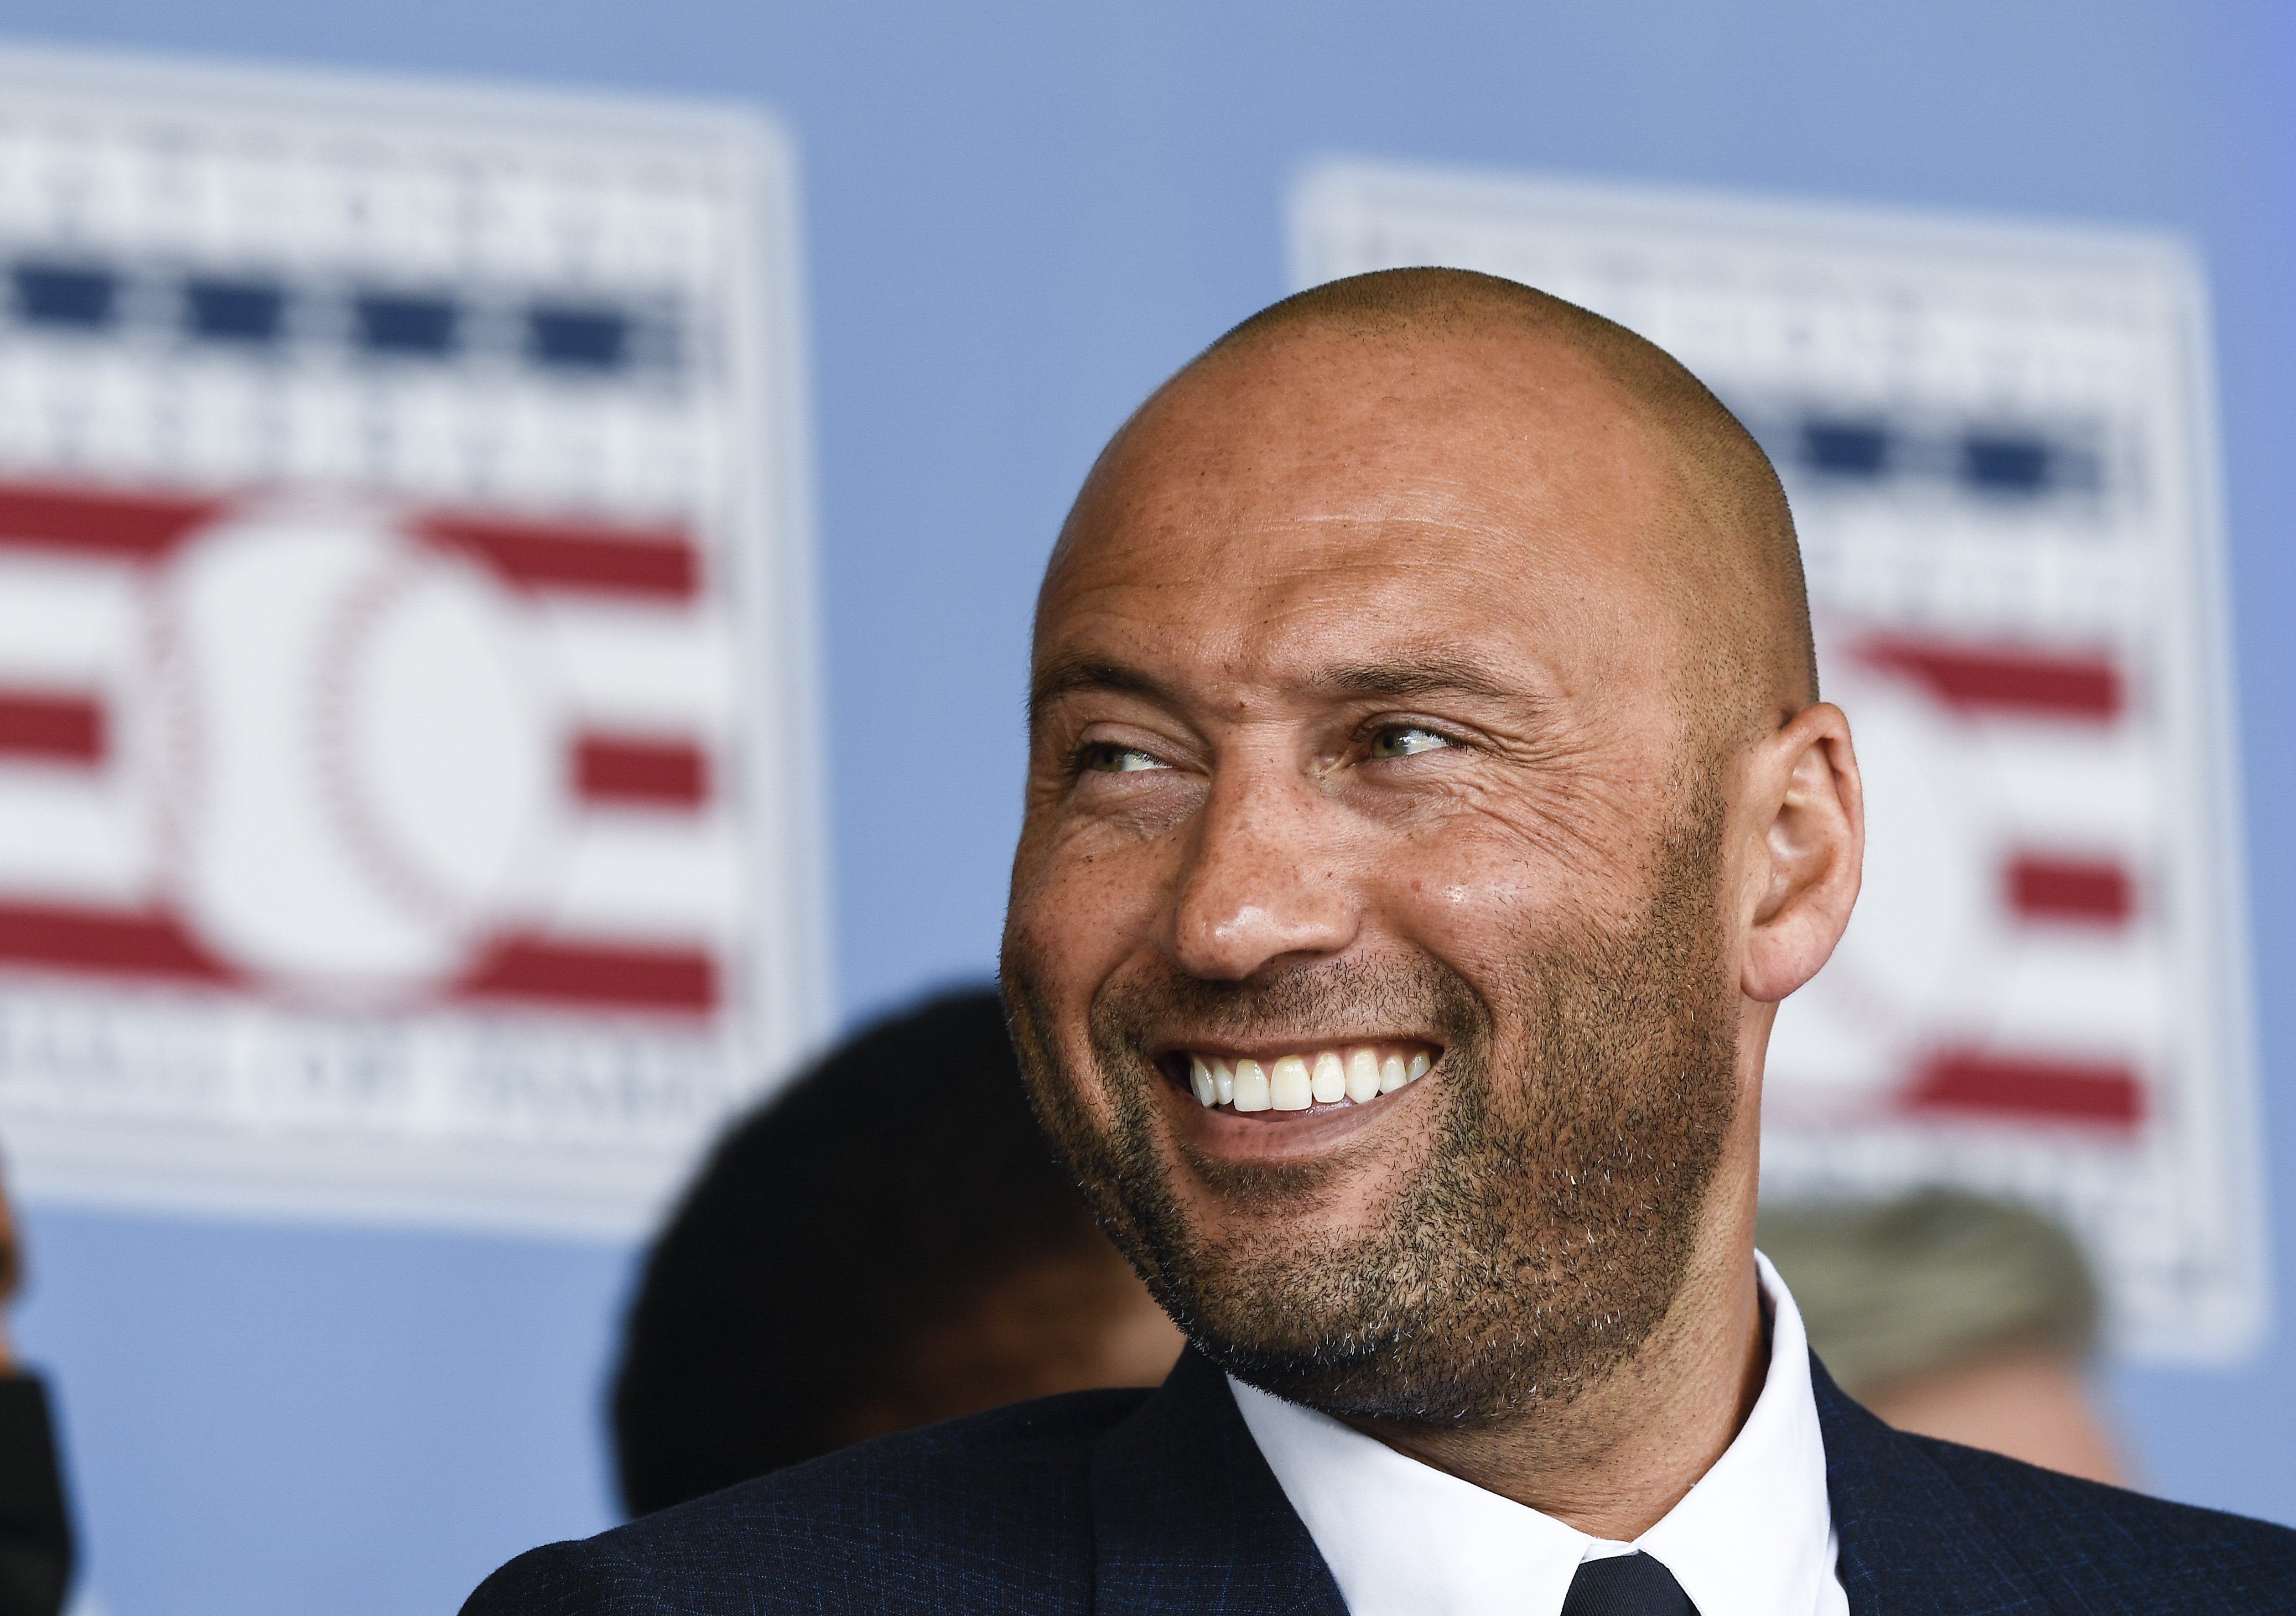 What Yankees great Derek Jeter's Hall of Fame plaque says 